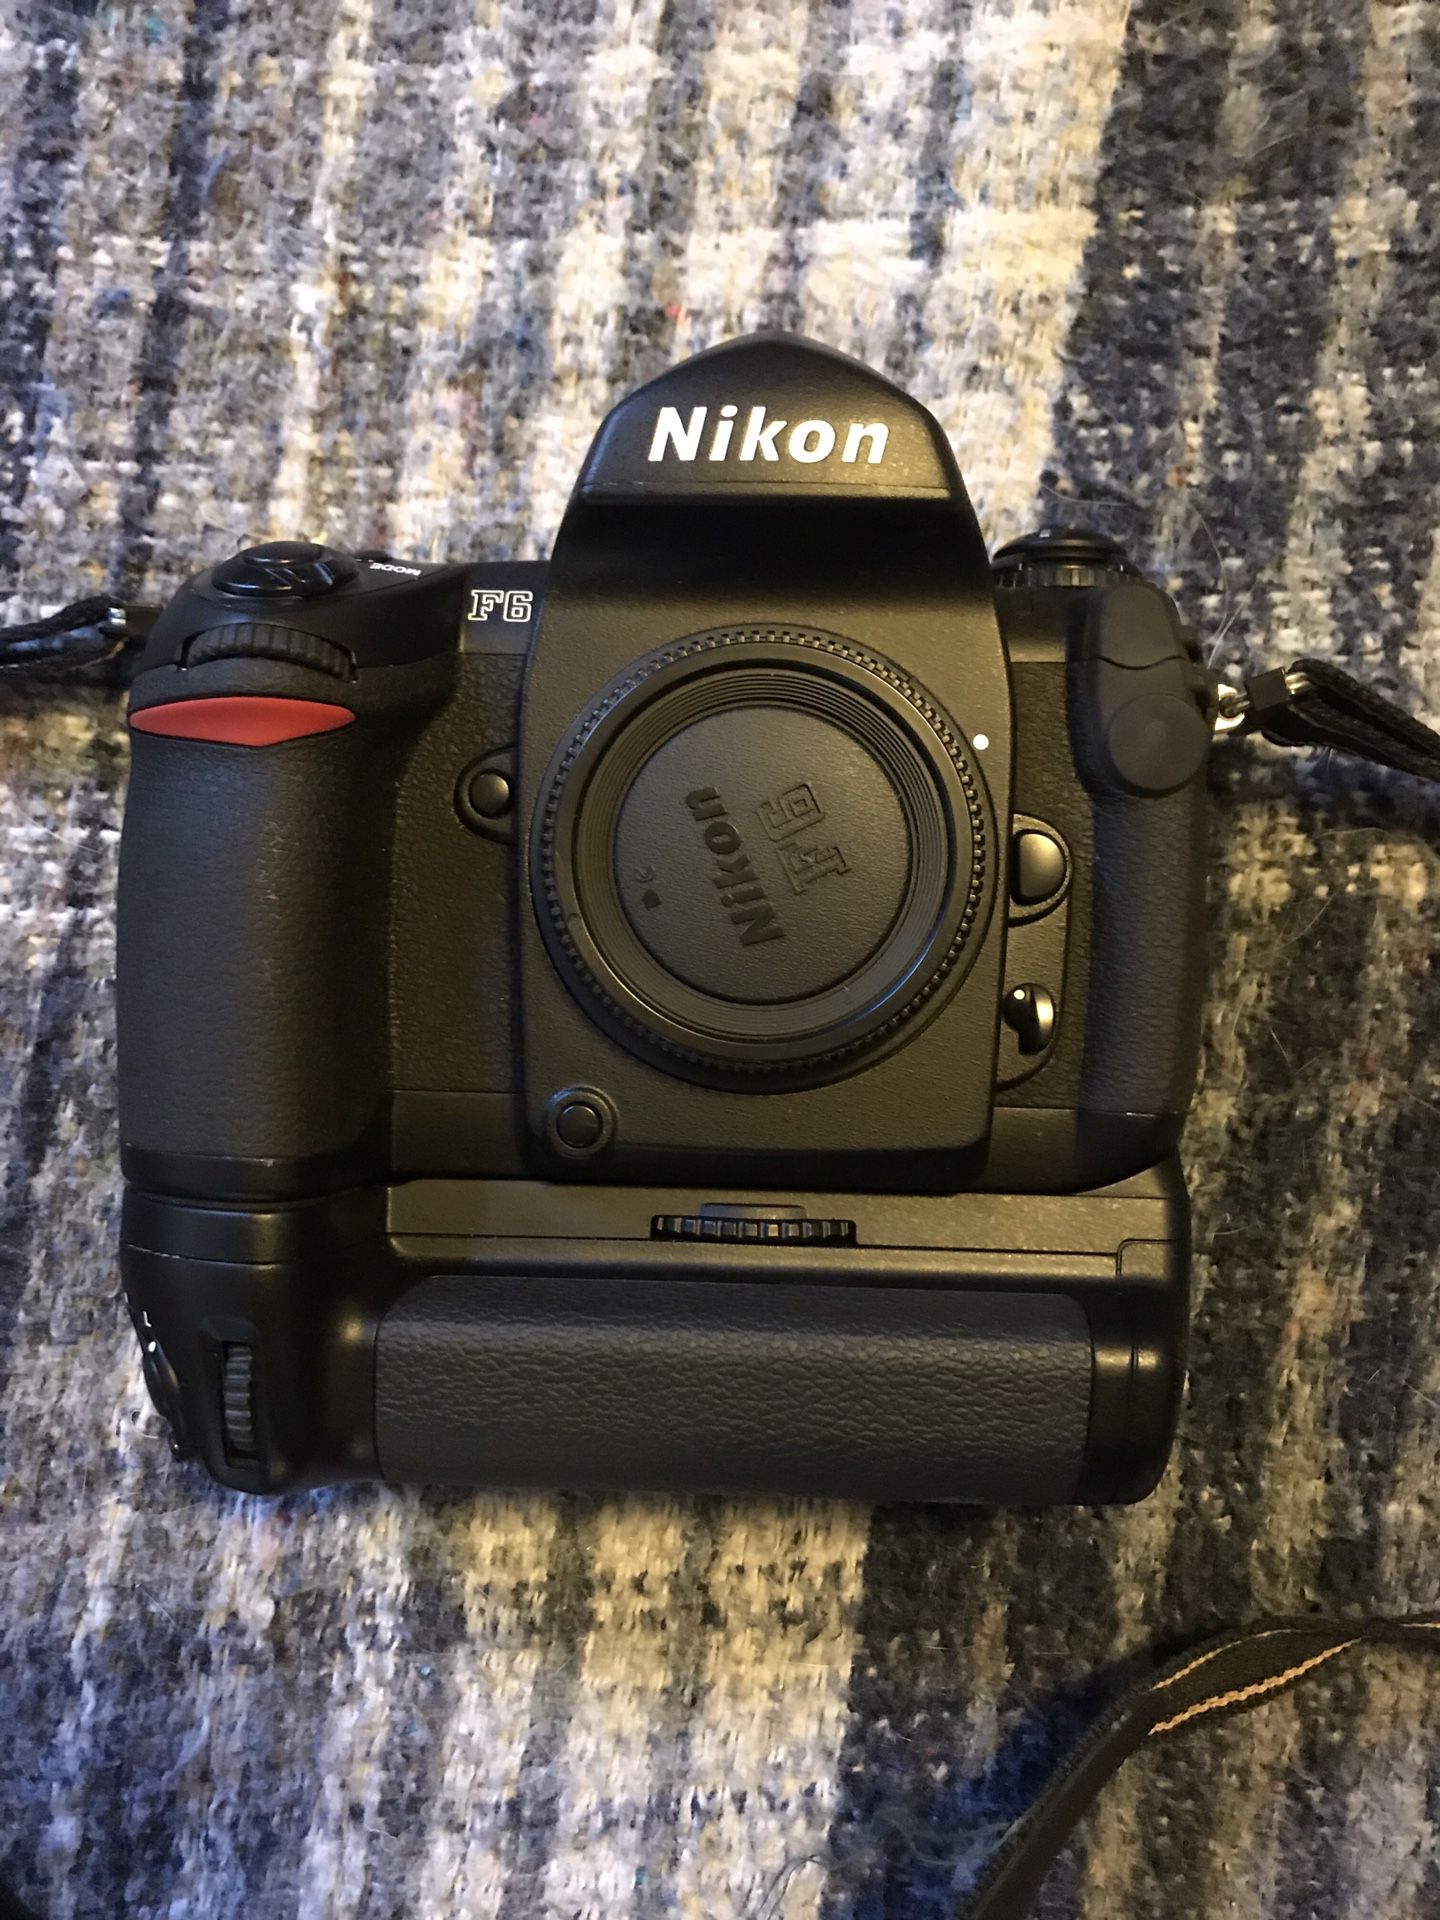 Nikon F6 with extended battery pack and parts